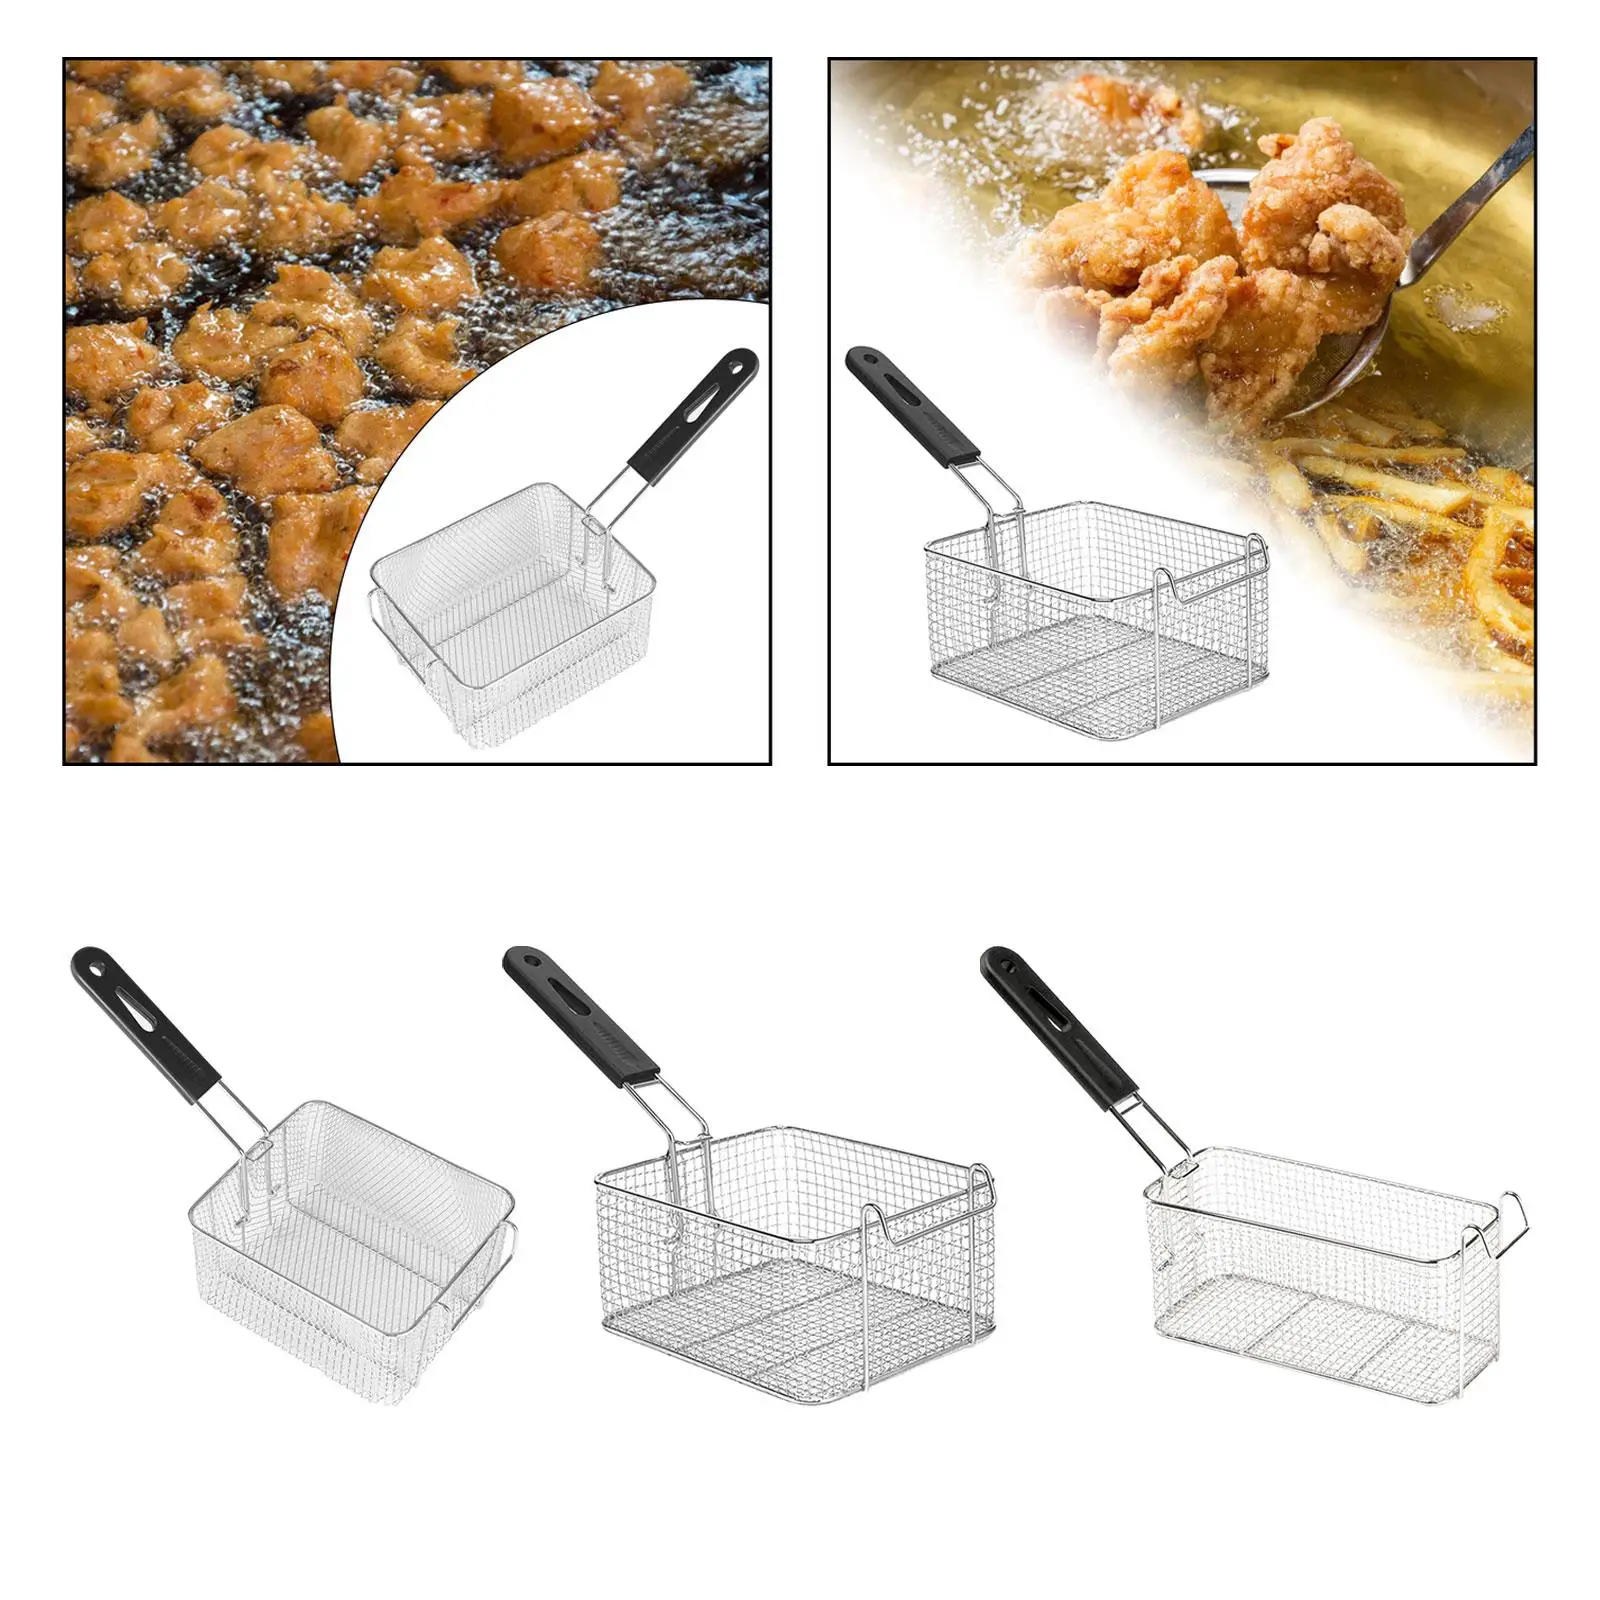 Deep Fry Basket Cooking Tool Portable Stainless Steel Frying Serving Basket for Chicken Wing Kitchen Cafe Barbecue Onion Rings